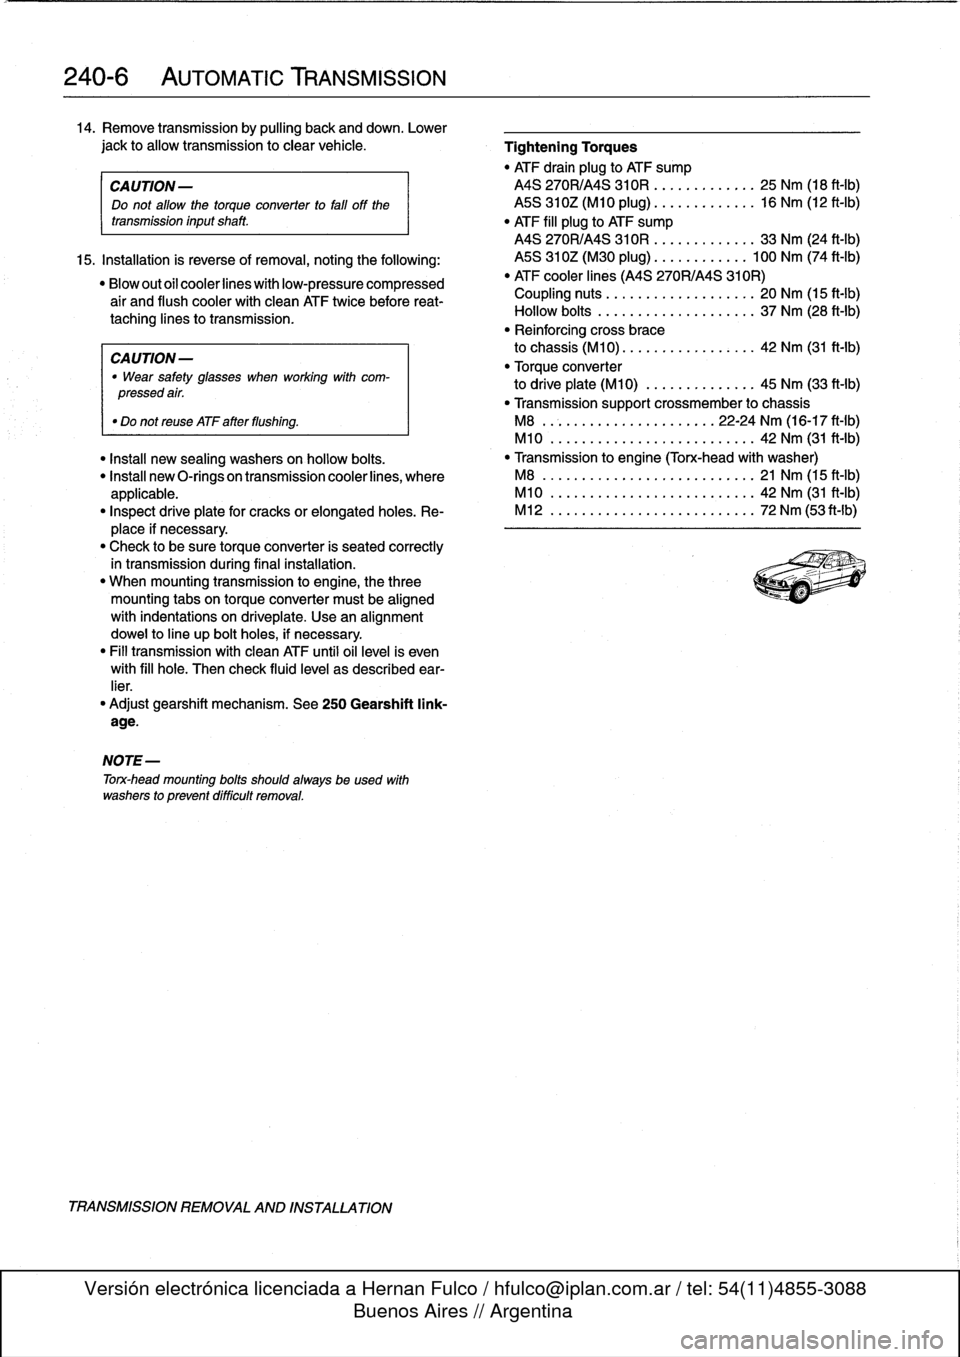 BMW 325i 1994 E36 Owners Guide 
240-
6

	

AUTOMATIC
TRANSMISSION

14
.
Remove
transmission
by
pulling
back
and
down
.
Lower

jack
to
allow
transmission
to
clear
vehicle
.

	

Tightening
Torques

"
ATF
drain
plug
to
ATF
sump

CA
UT